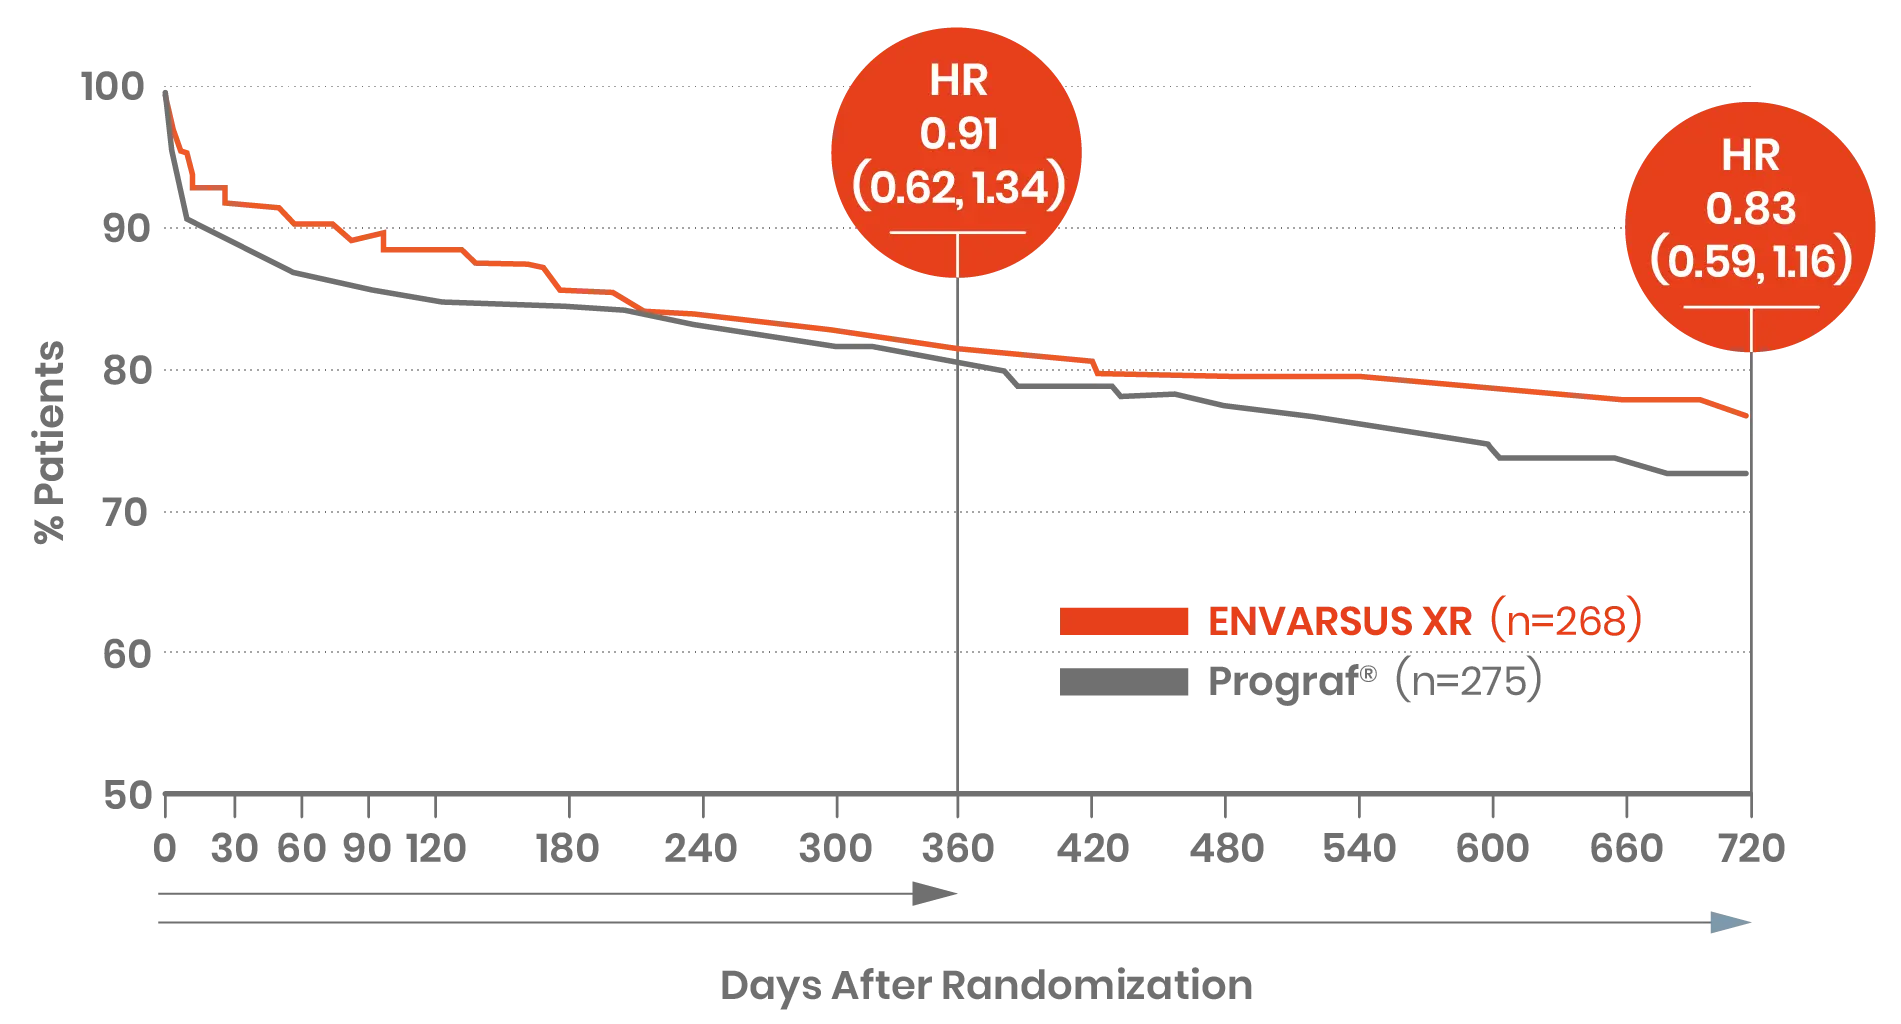 Graph comparing the percentage of patients' HR between Prograf and Envarsus XR over a 2 year period